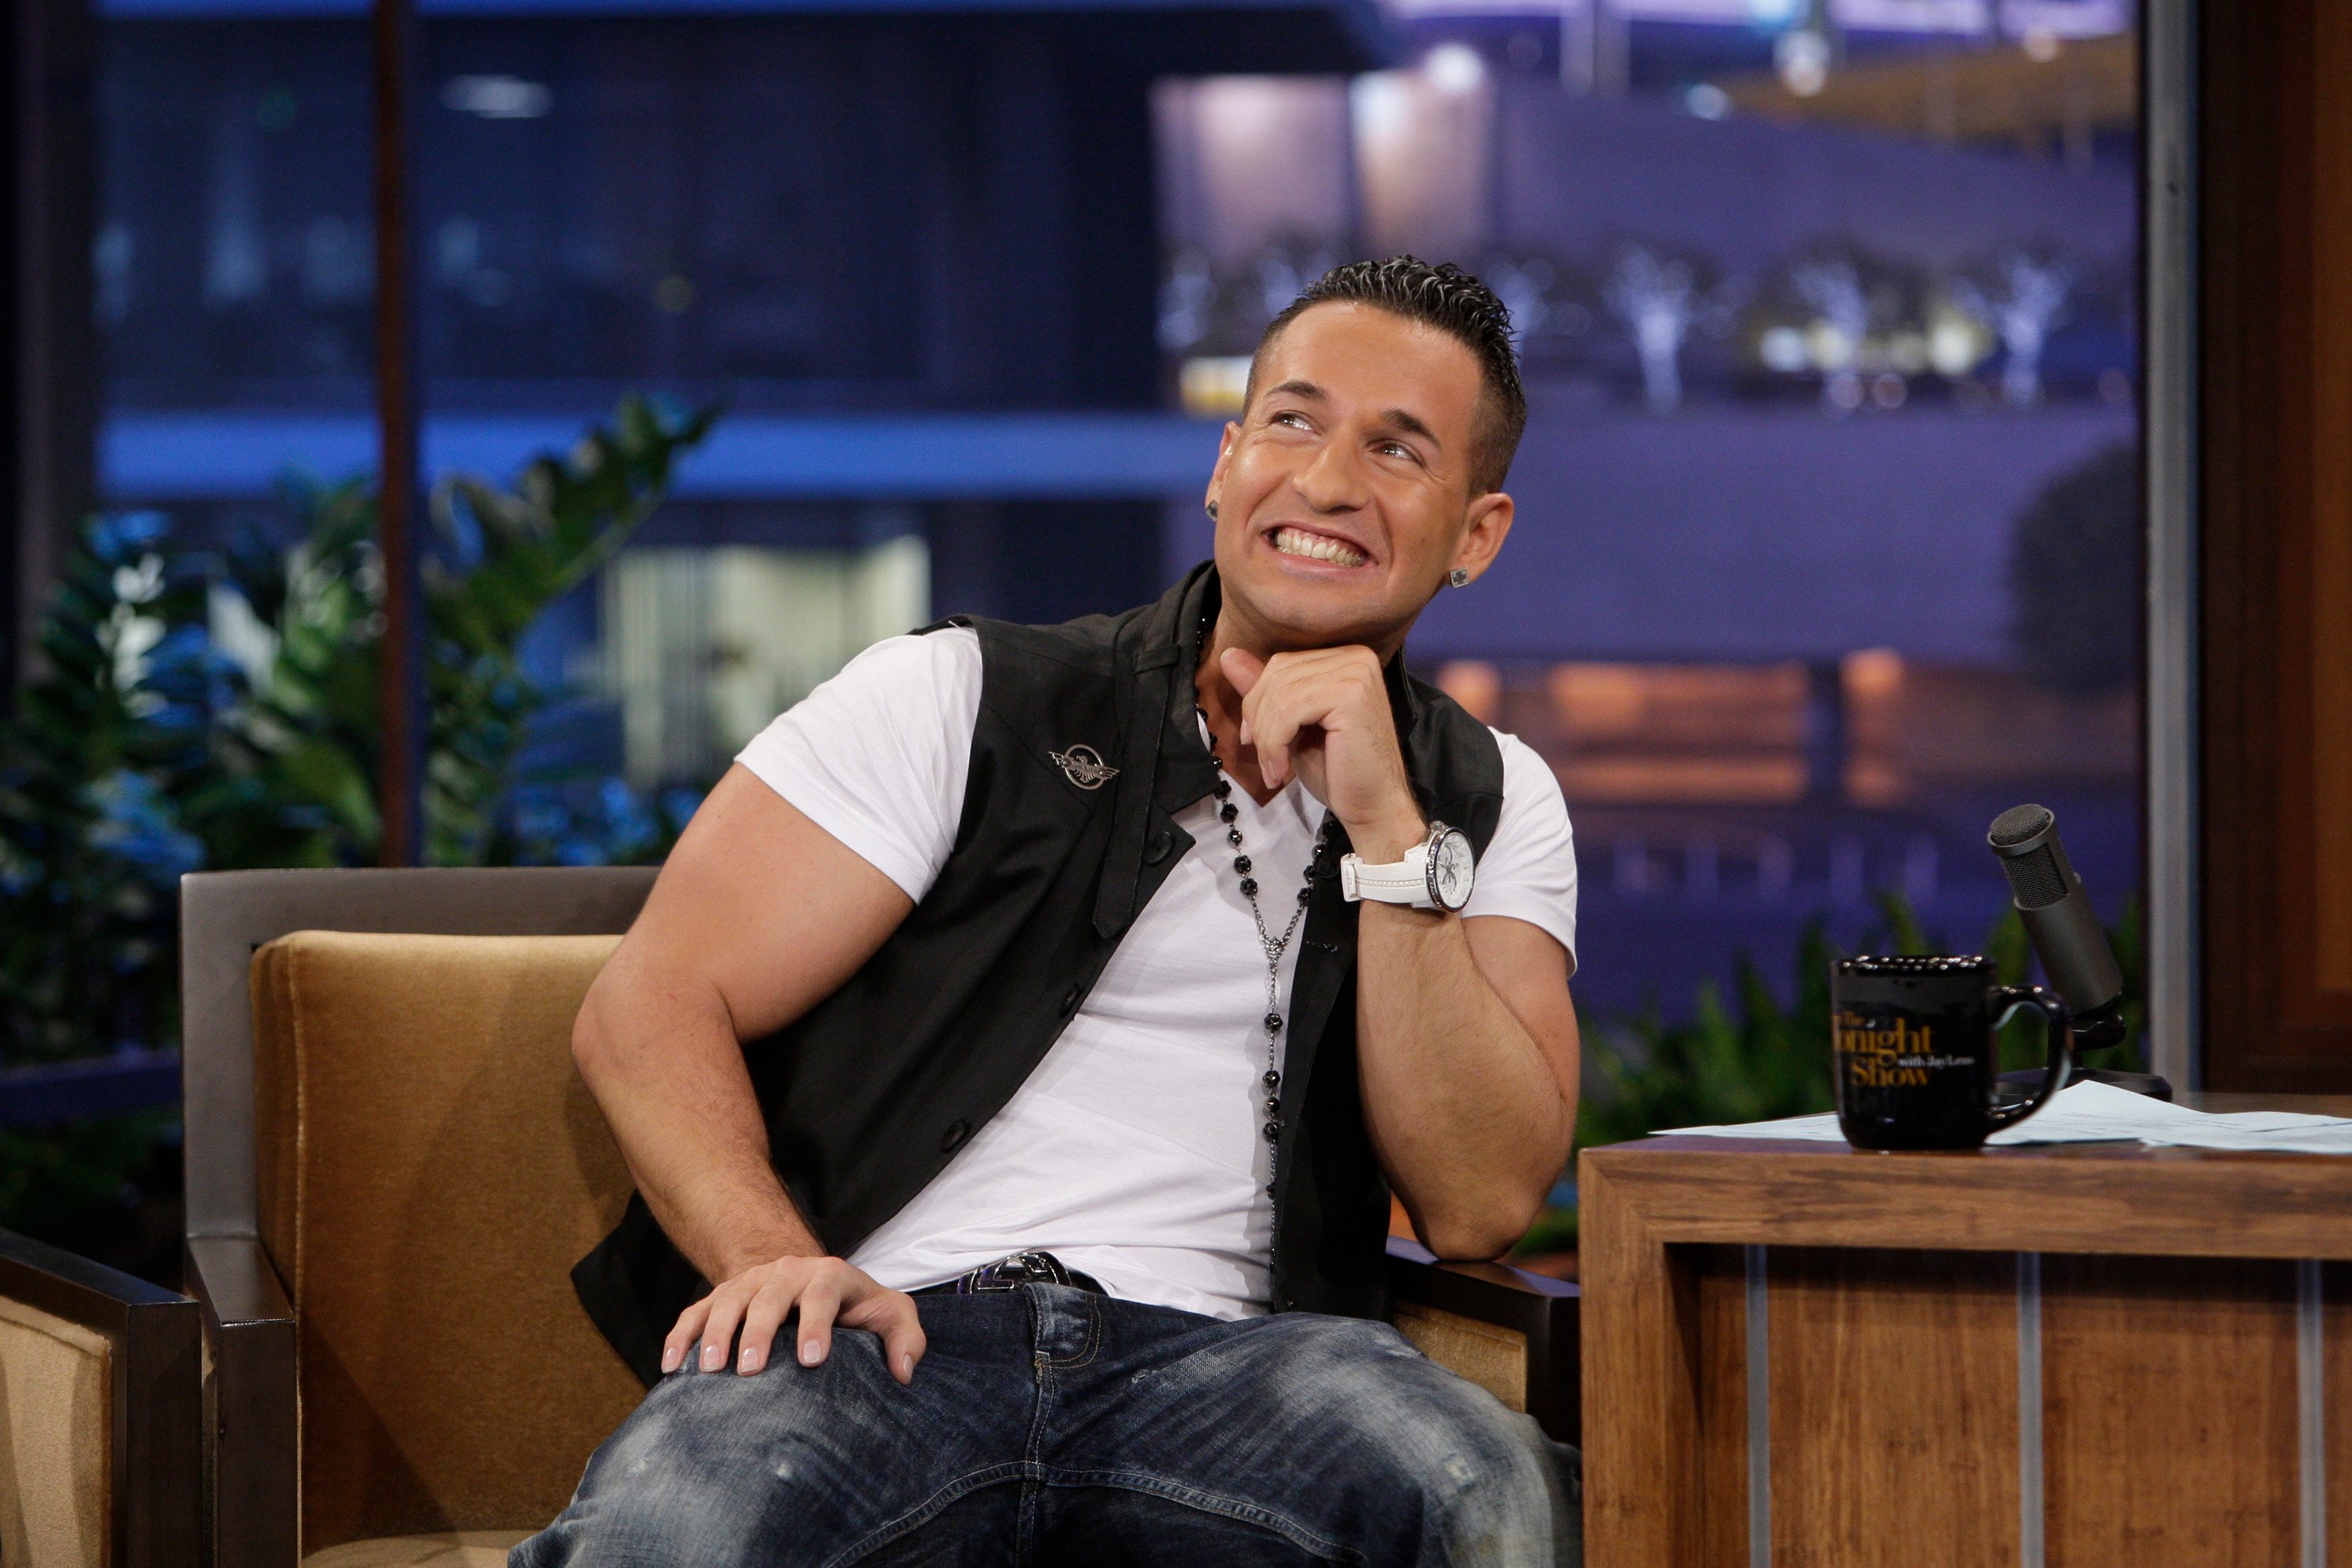 Mike 'The Situation' Sorrentino smiles for the camera on Jay Leno's talk show